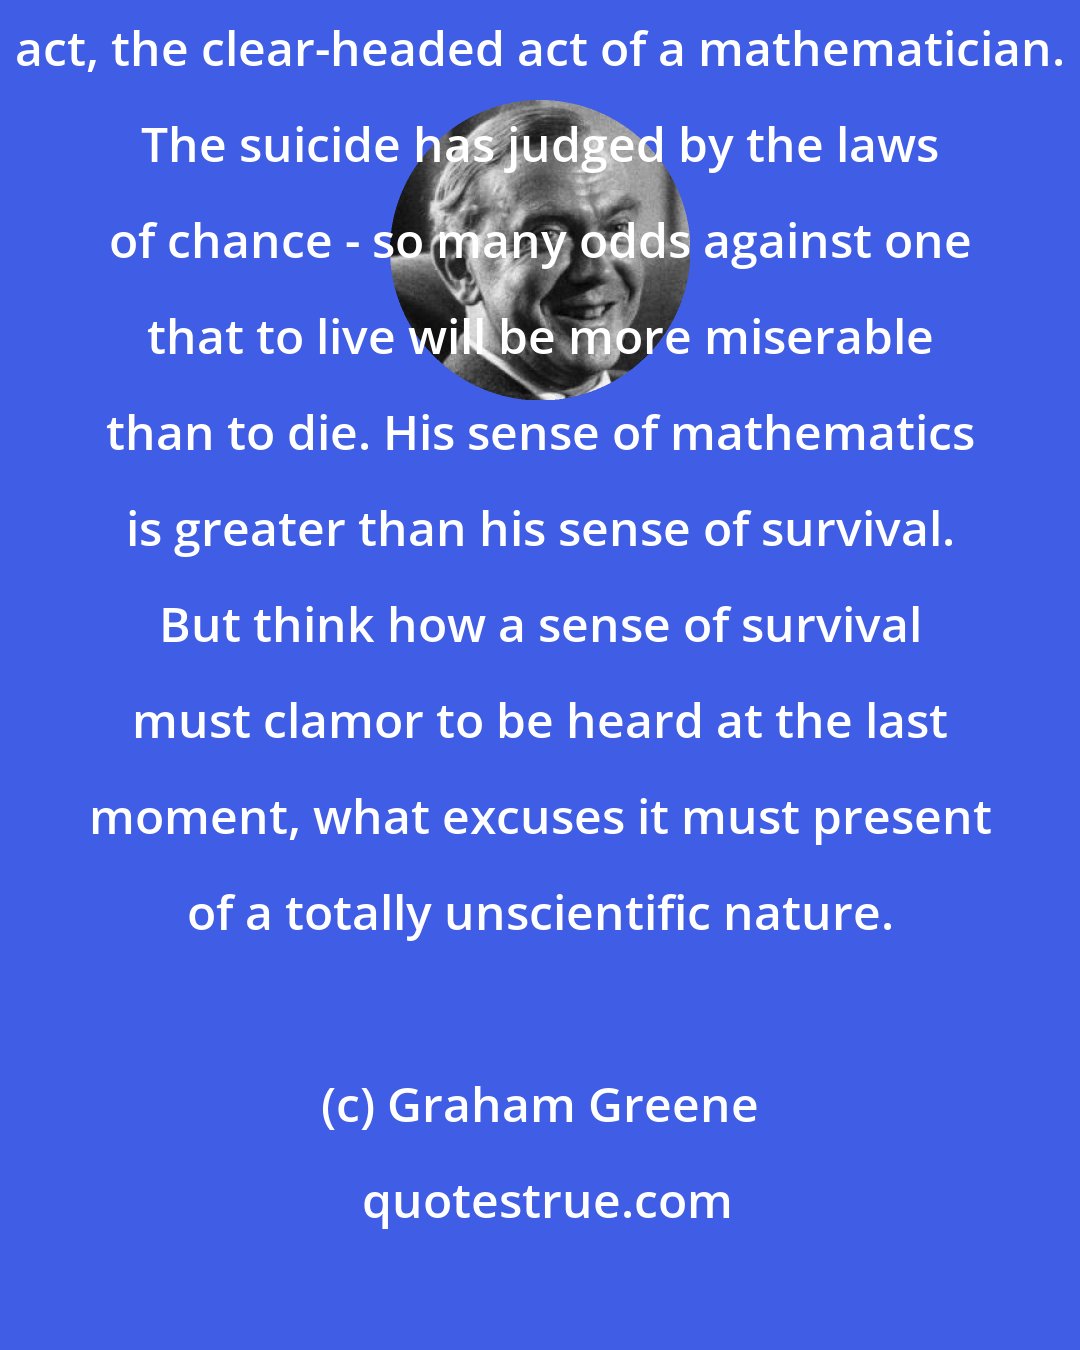 Graham Greene: However great a man's fear of life, suicide remains the courageous act, the clear-headed act of a mathematician. The suicide has judged by the laws of chance - so many odds against one that to live will be more miserable than to die. His sense of mathematics is greater than his sense of survival. But think how a sense of survival must clamor to be heard at the last moment, what excuses it must present of a totally unscientific nature.